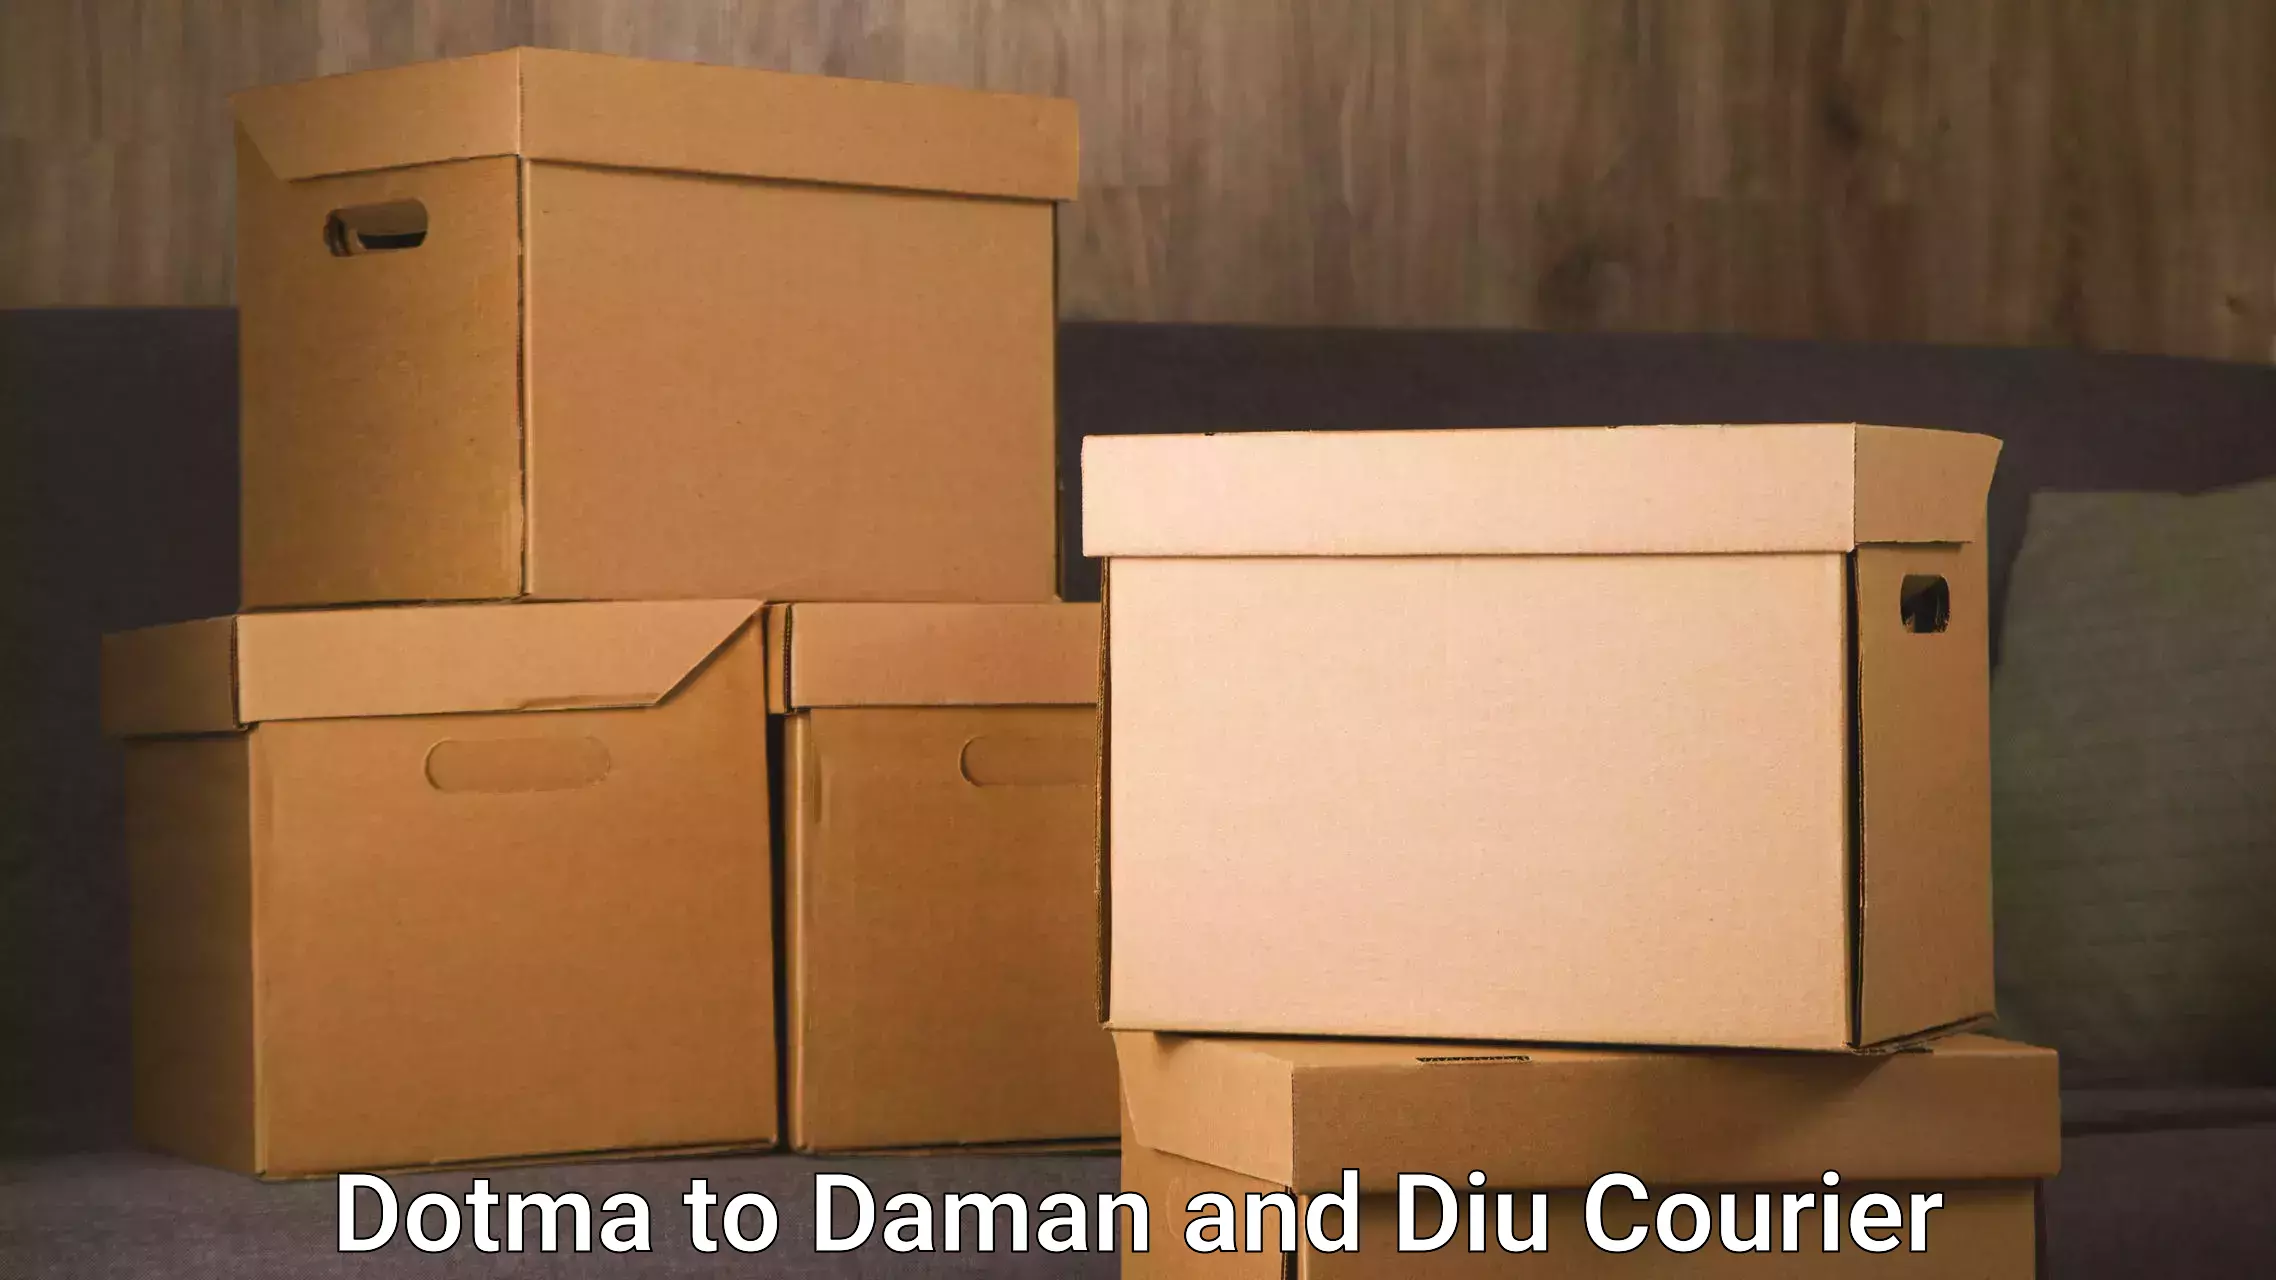 Efficient package consolidation Dotma to Diu